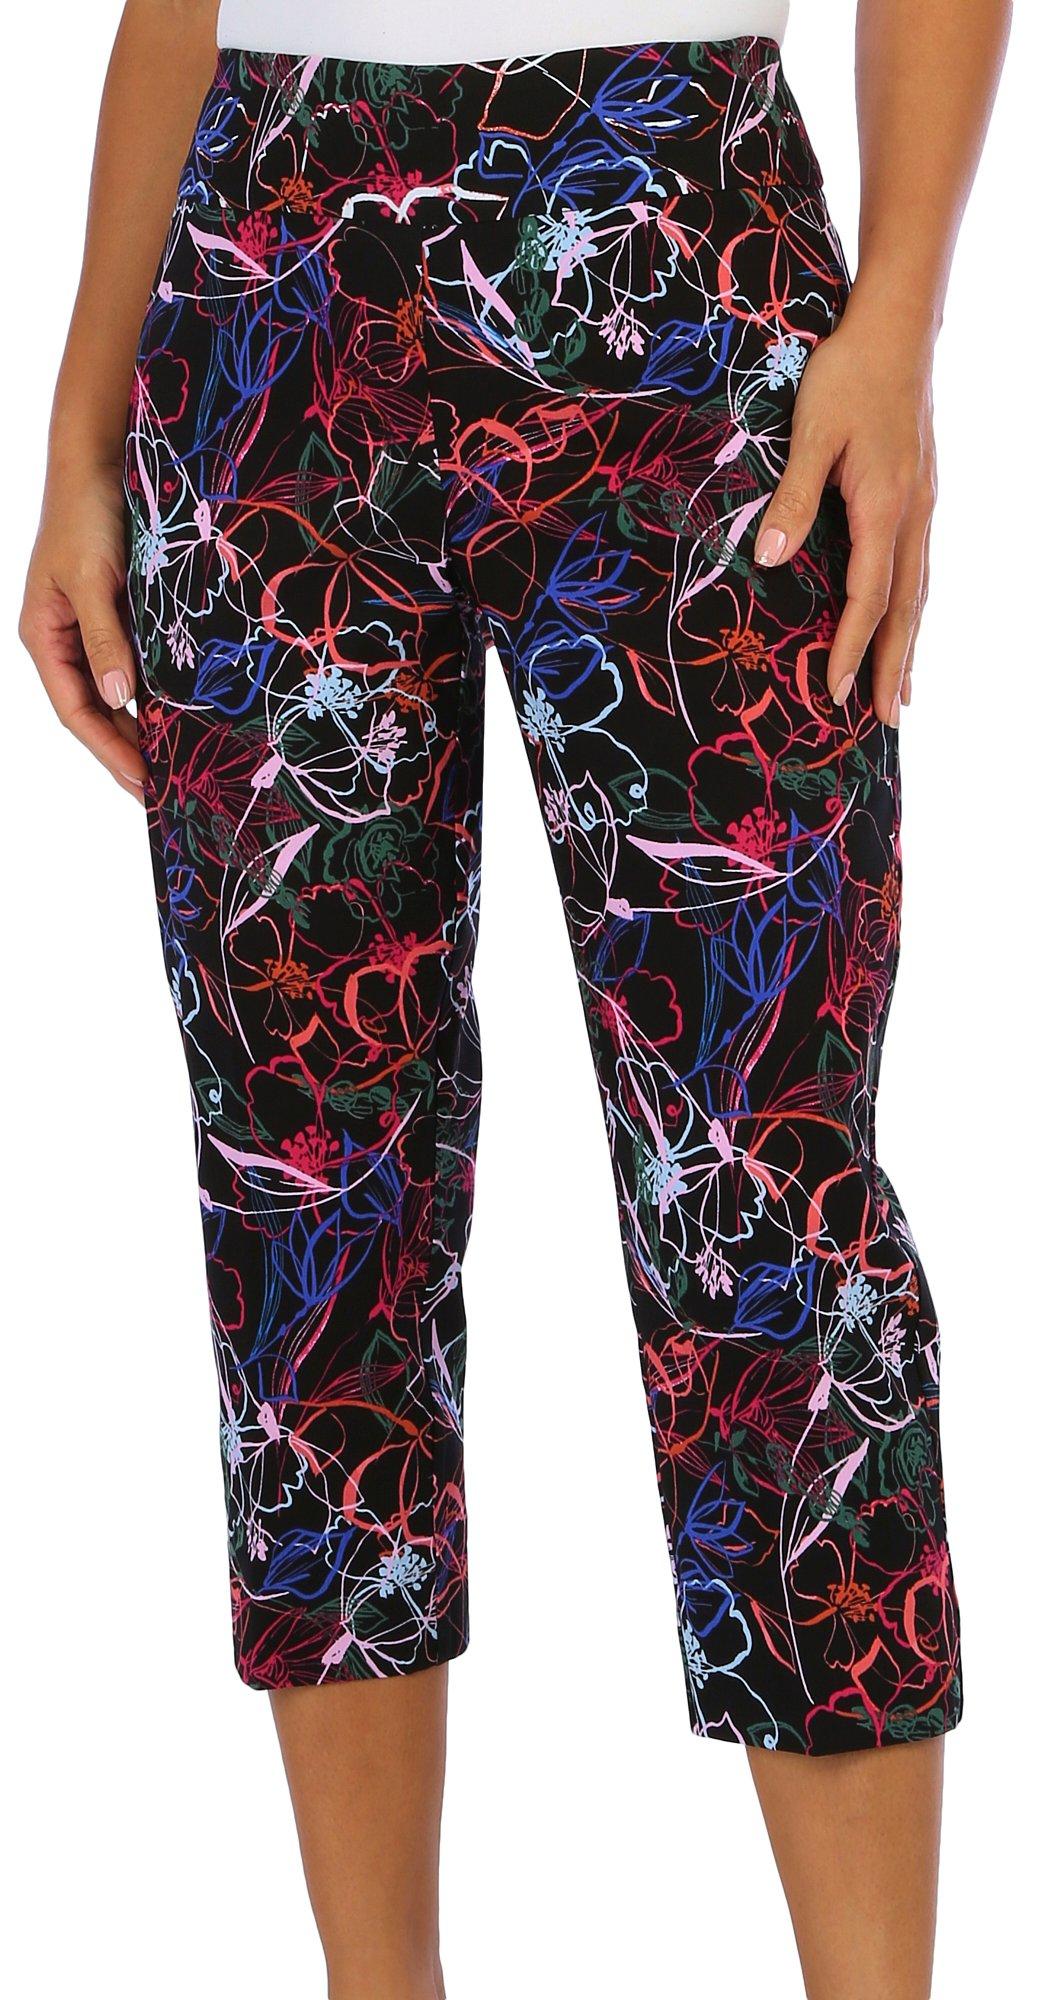 Juniper + Lime Women 21 in. Abstract Printed Capris